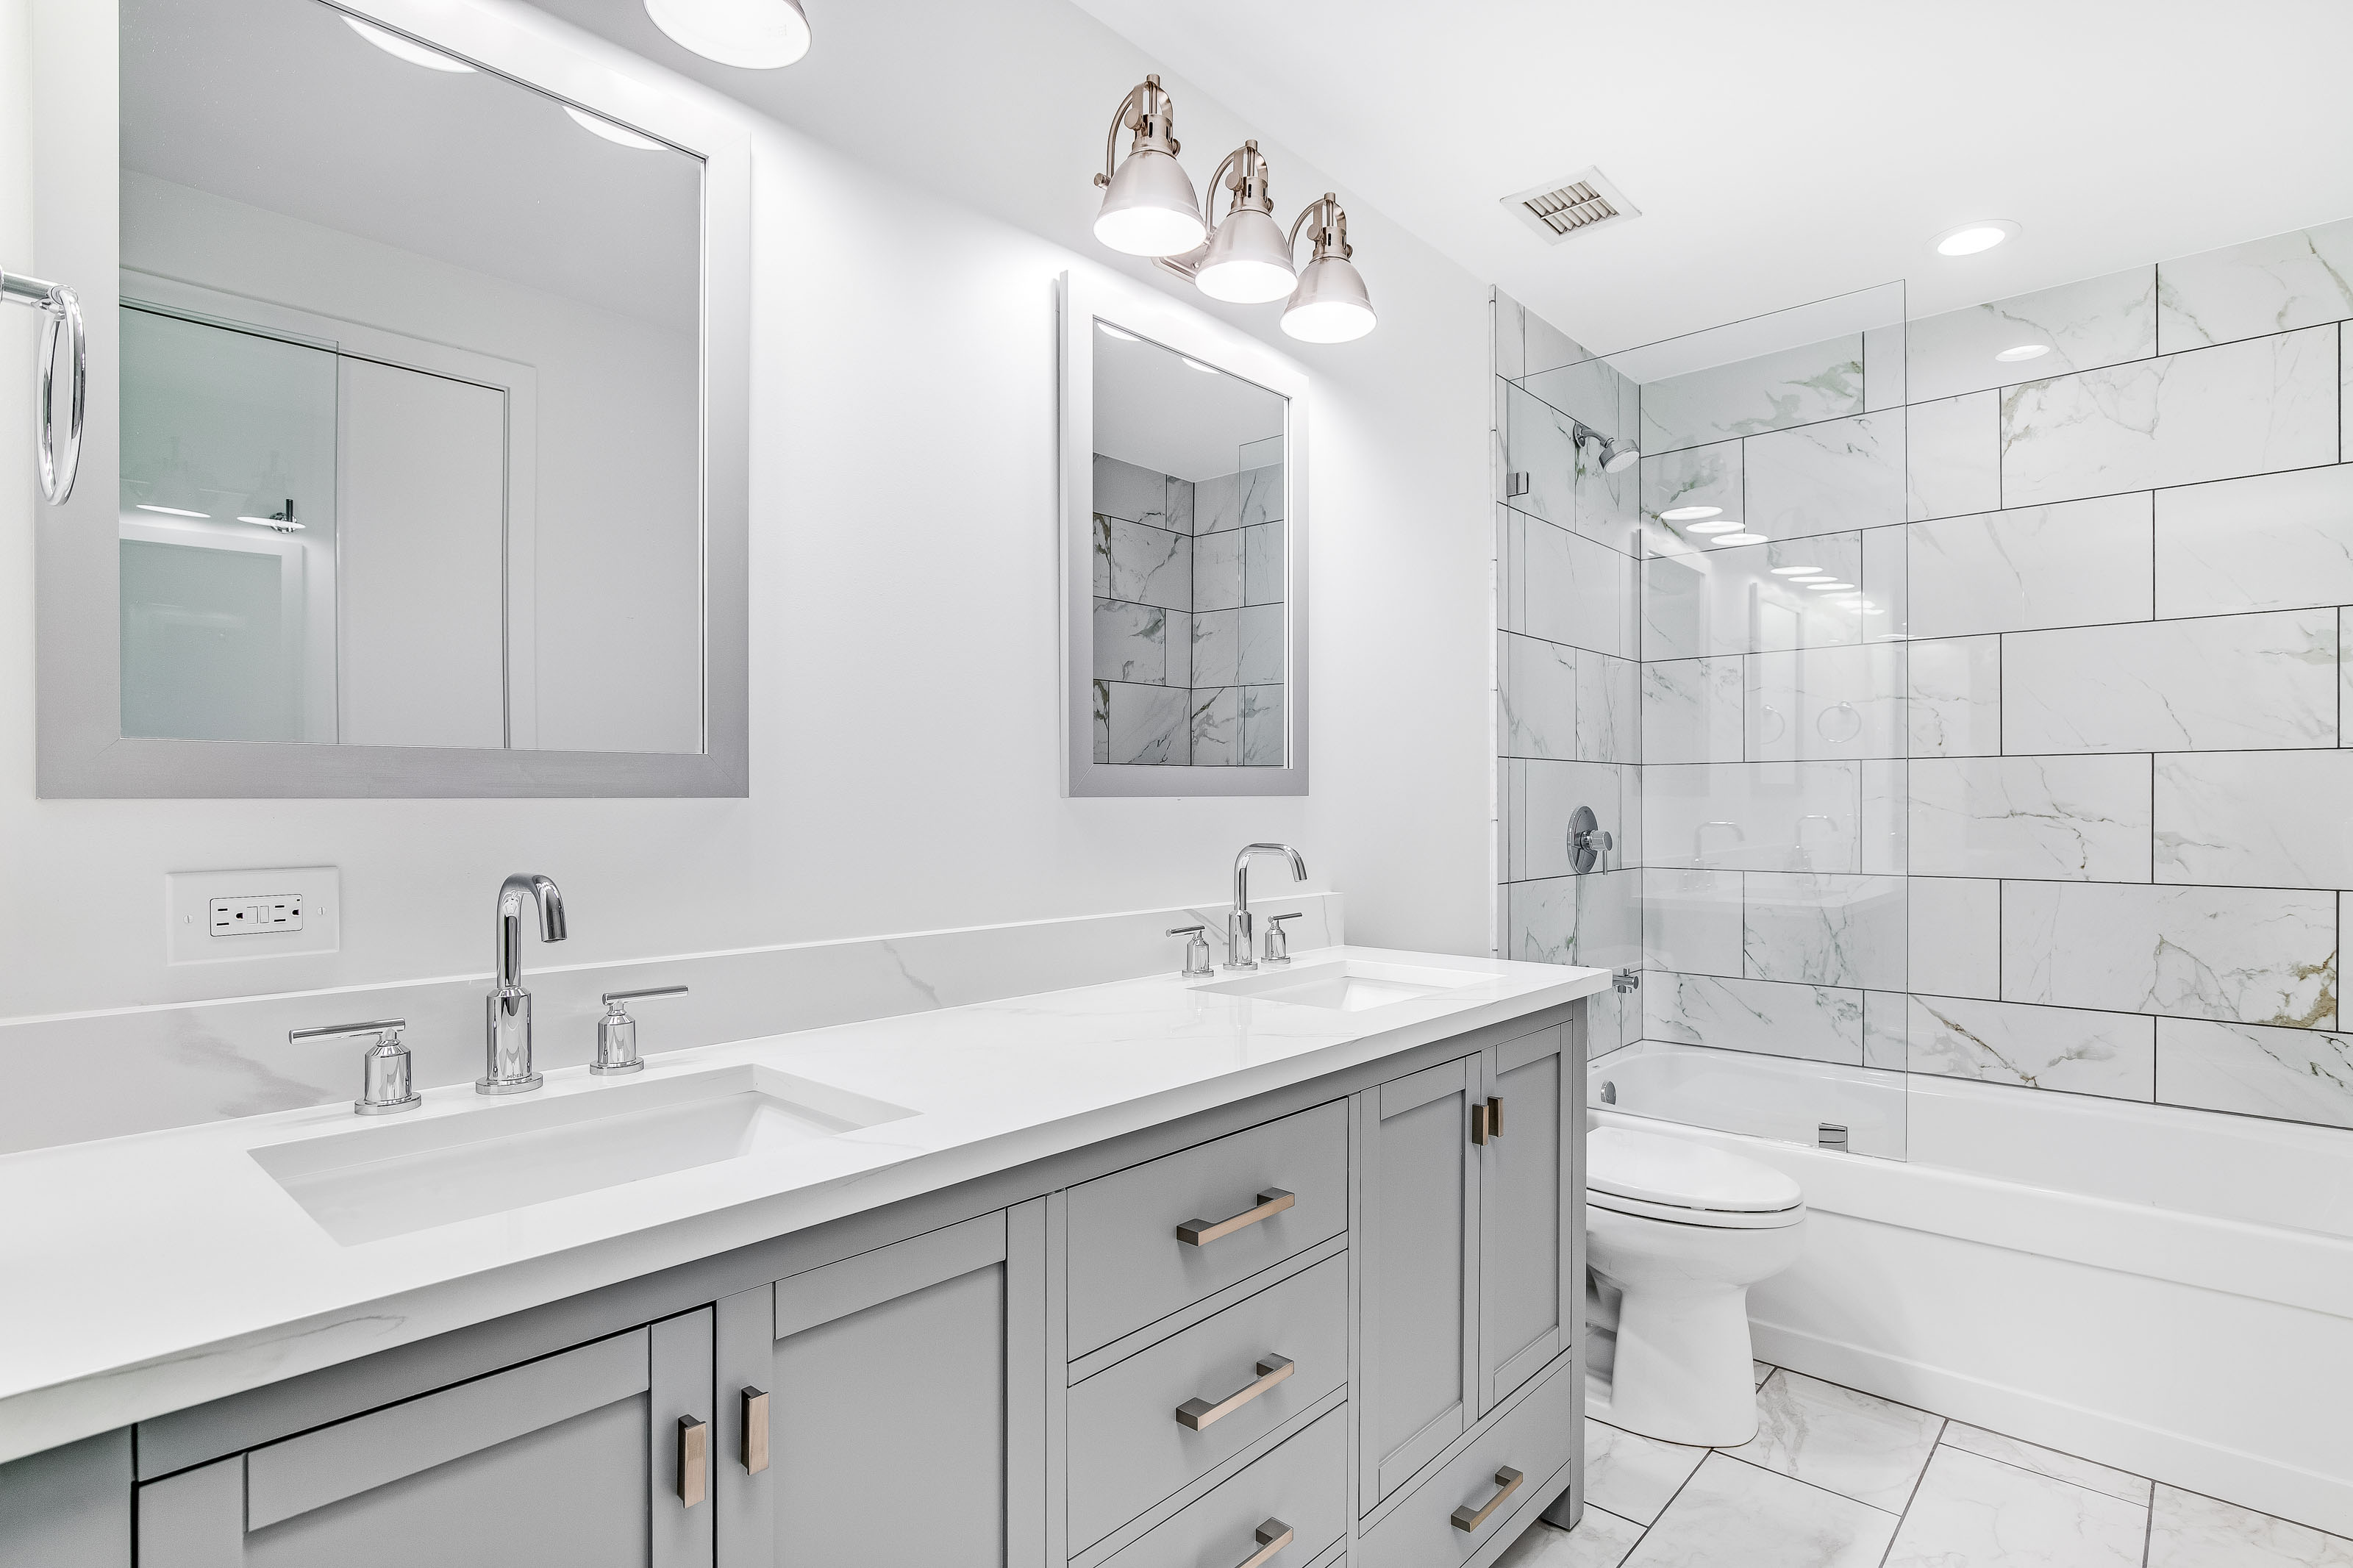 4 Easy and Clever Bathroom Upgrade Ideas Without a Renovation